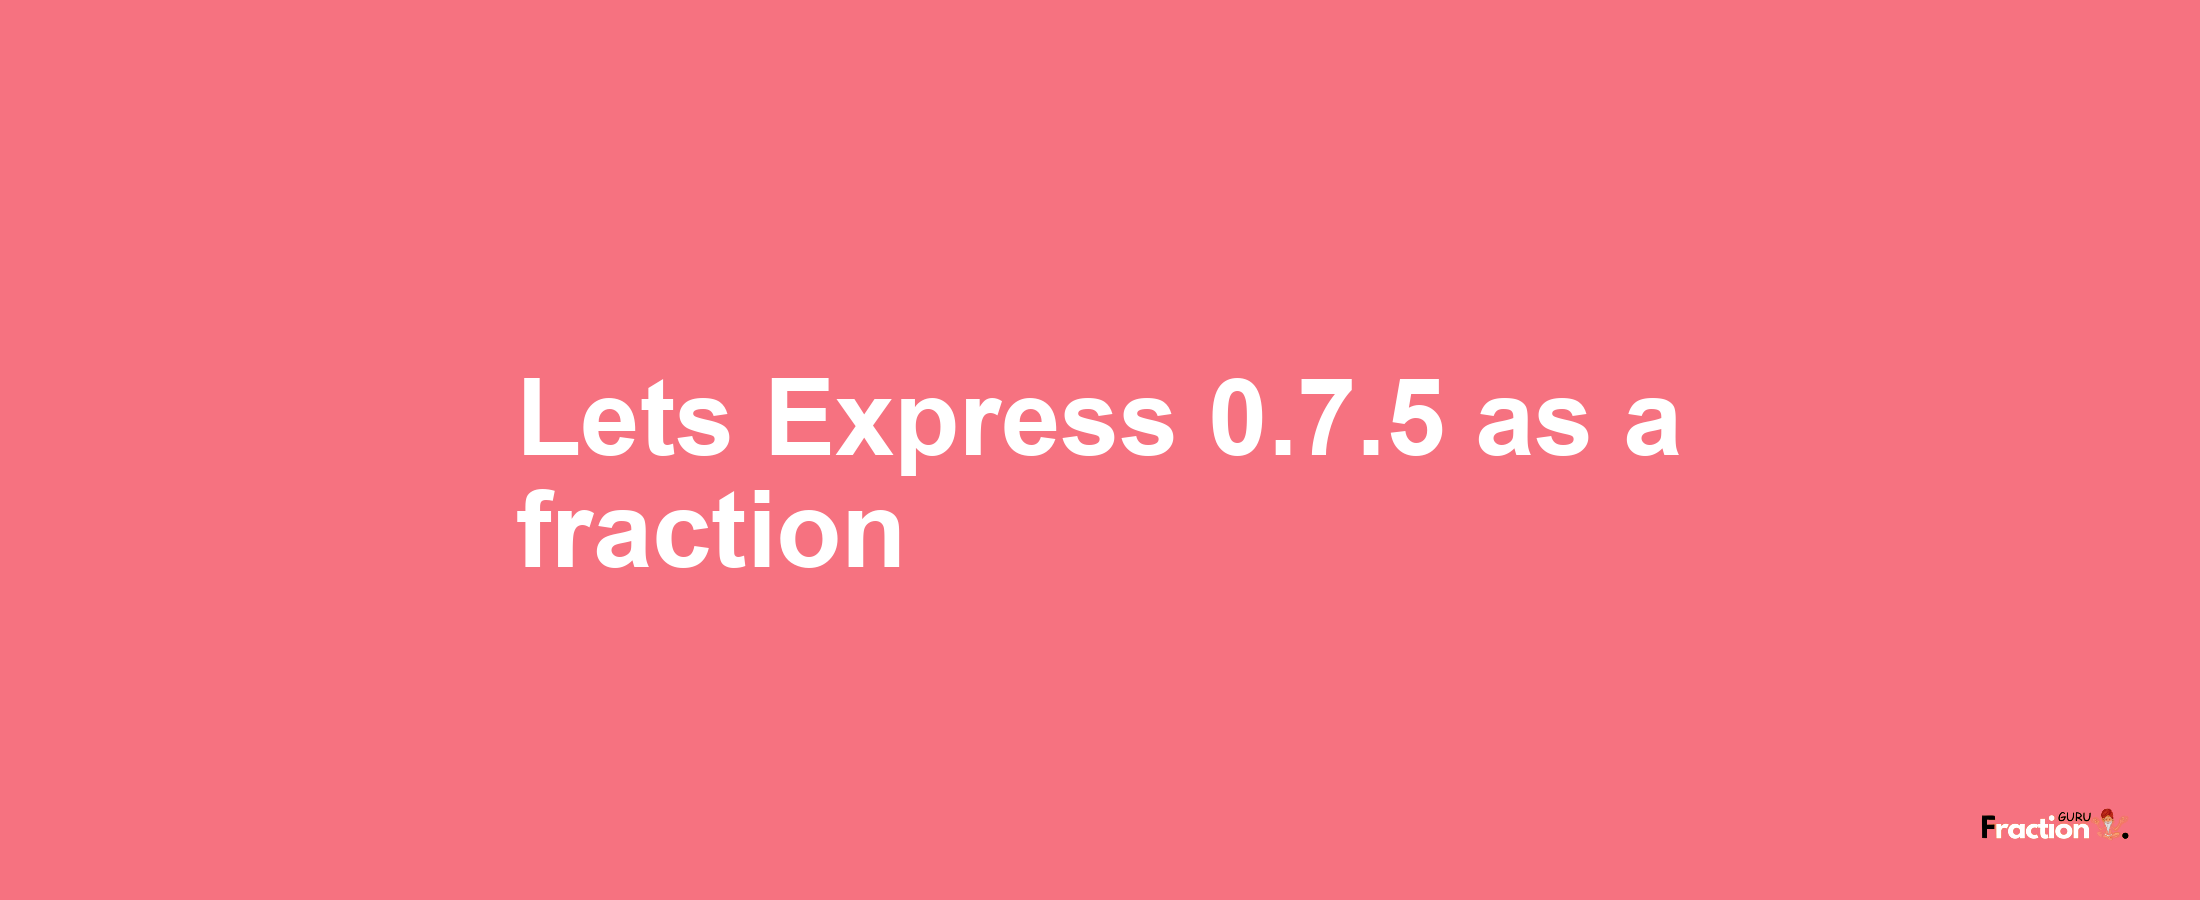 Lets Express 0.7.5 as afraction